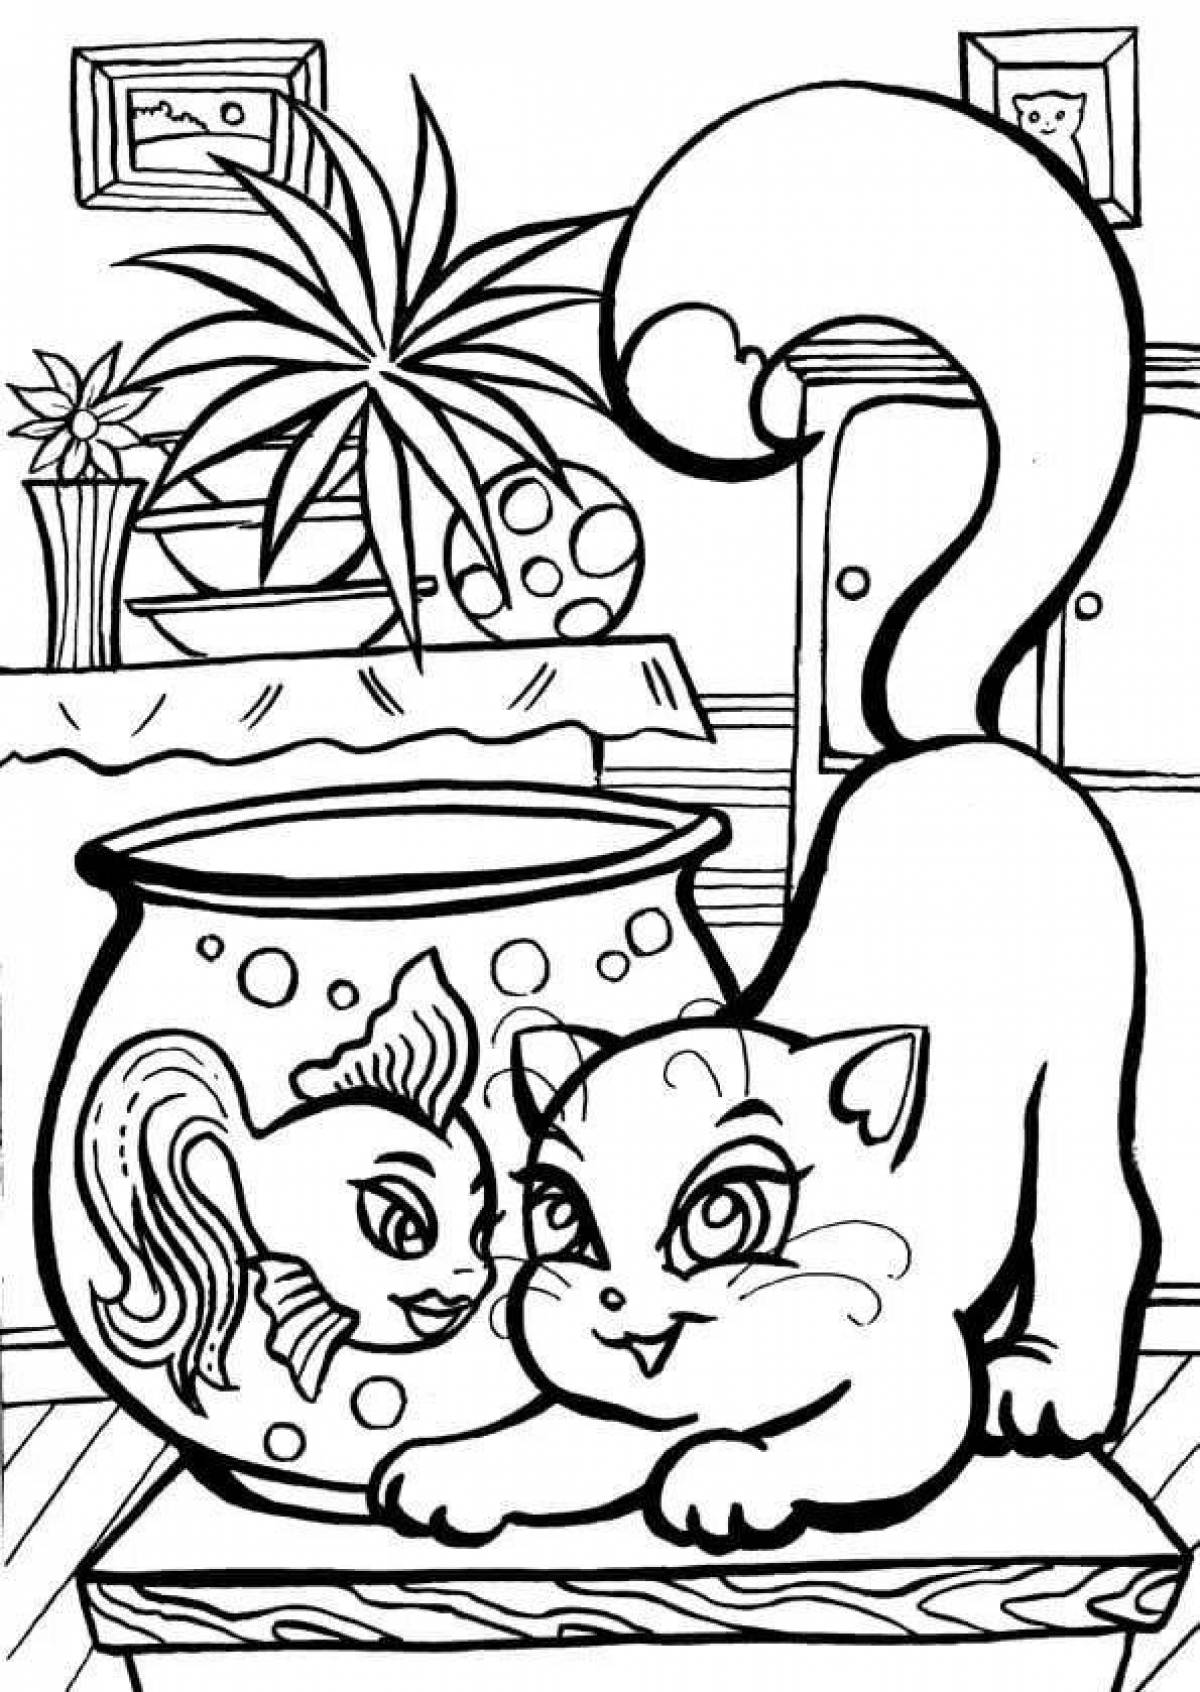 Exquisite cat coloring book for 6-7 year olds